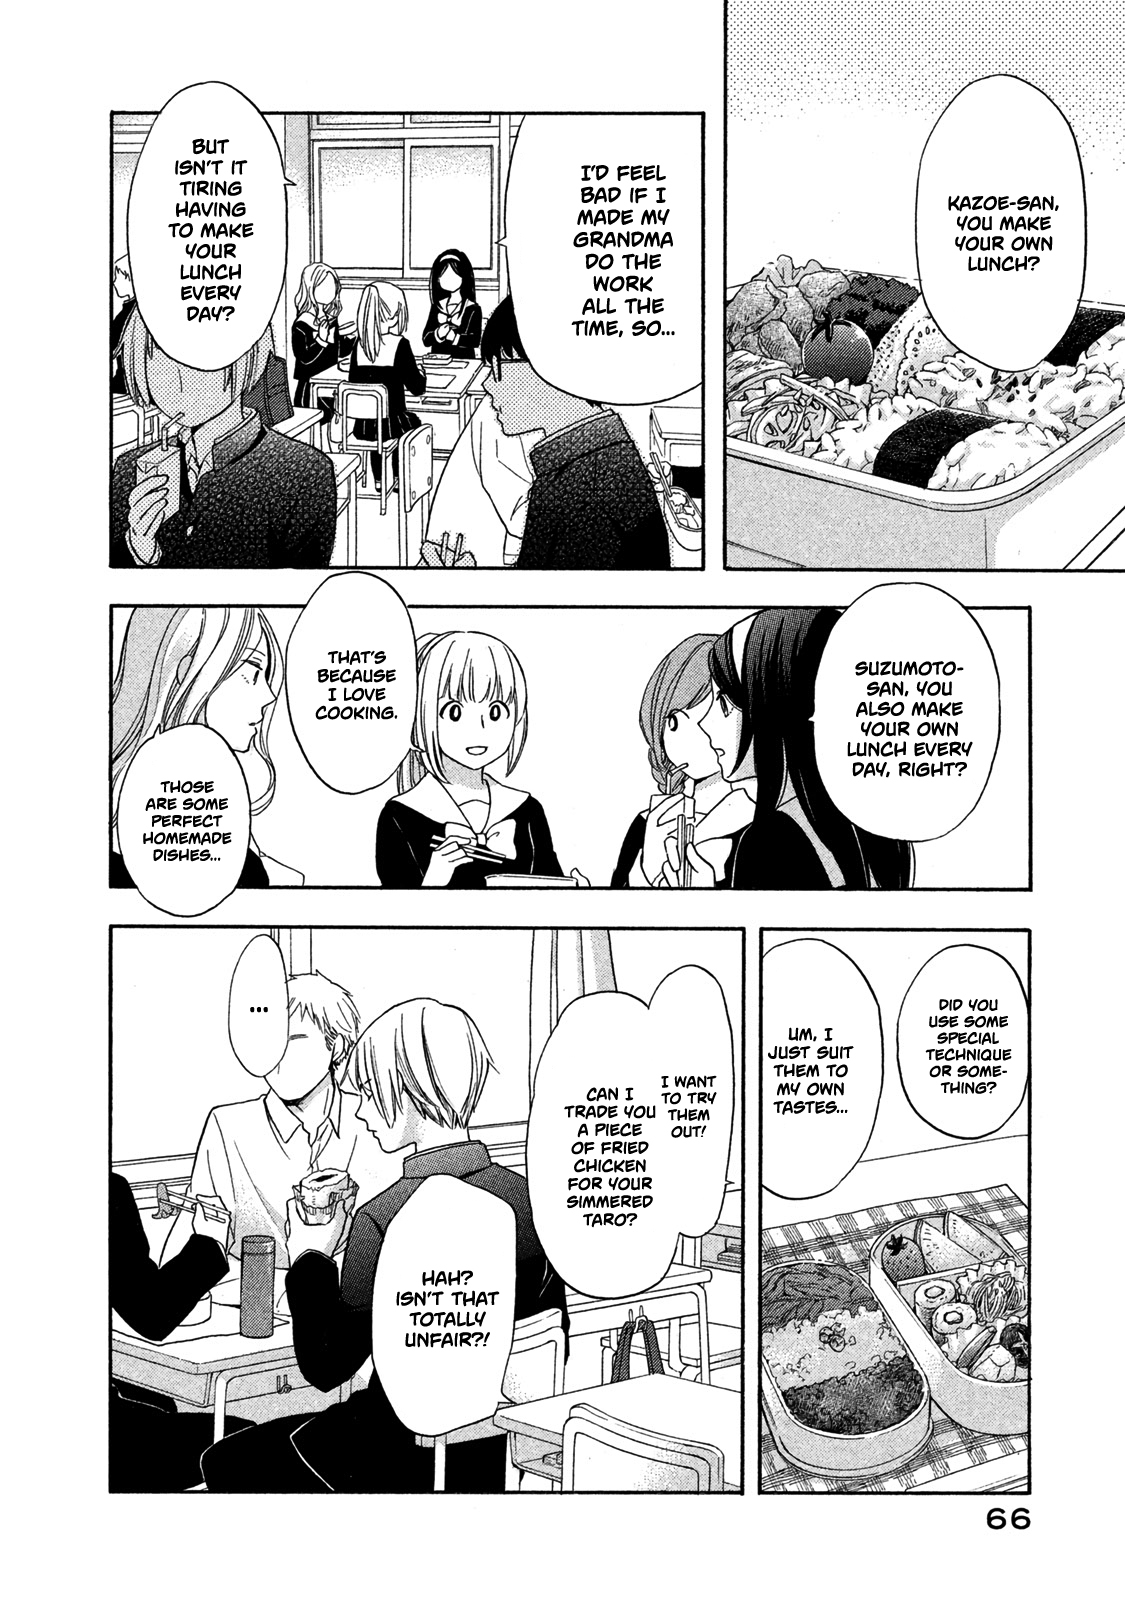 Hanazono and Kazoe's Bizarre After School Rendezvous Vol. 1 Ch. 4 Daunting Images